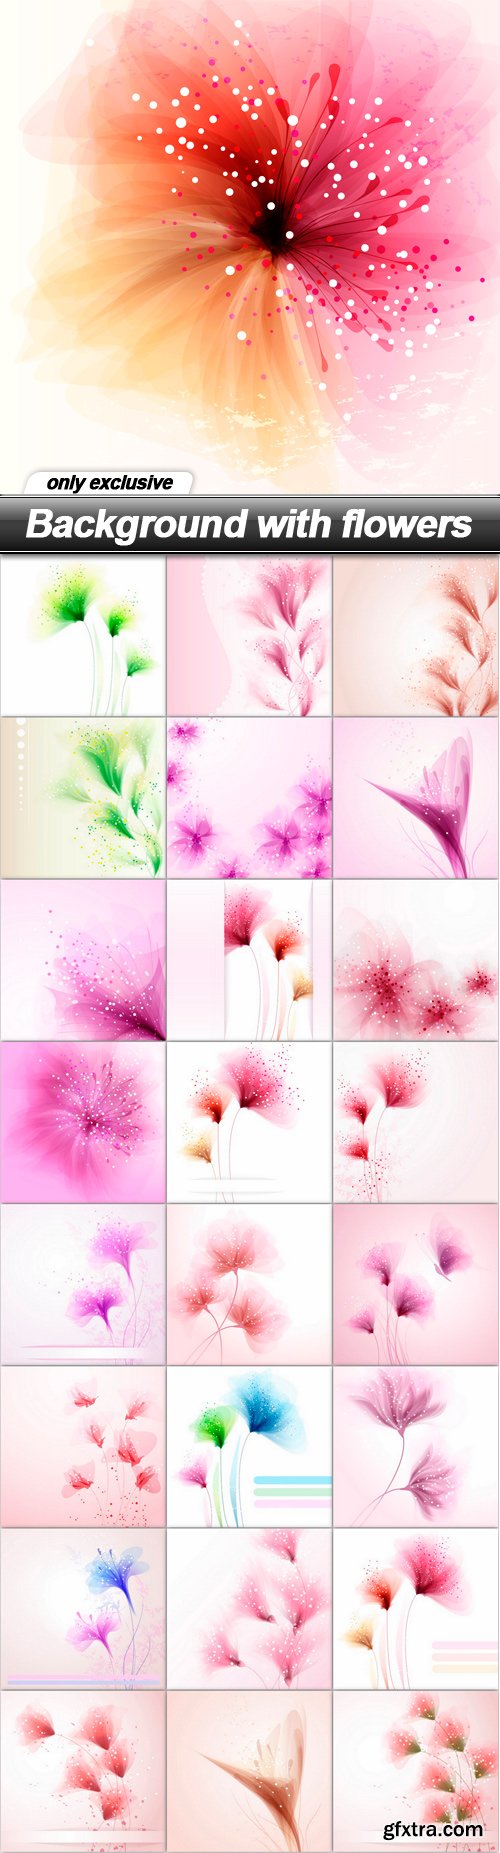 Background with flowers - 25 EPS